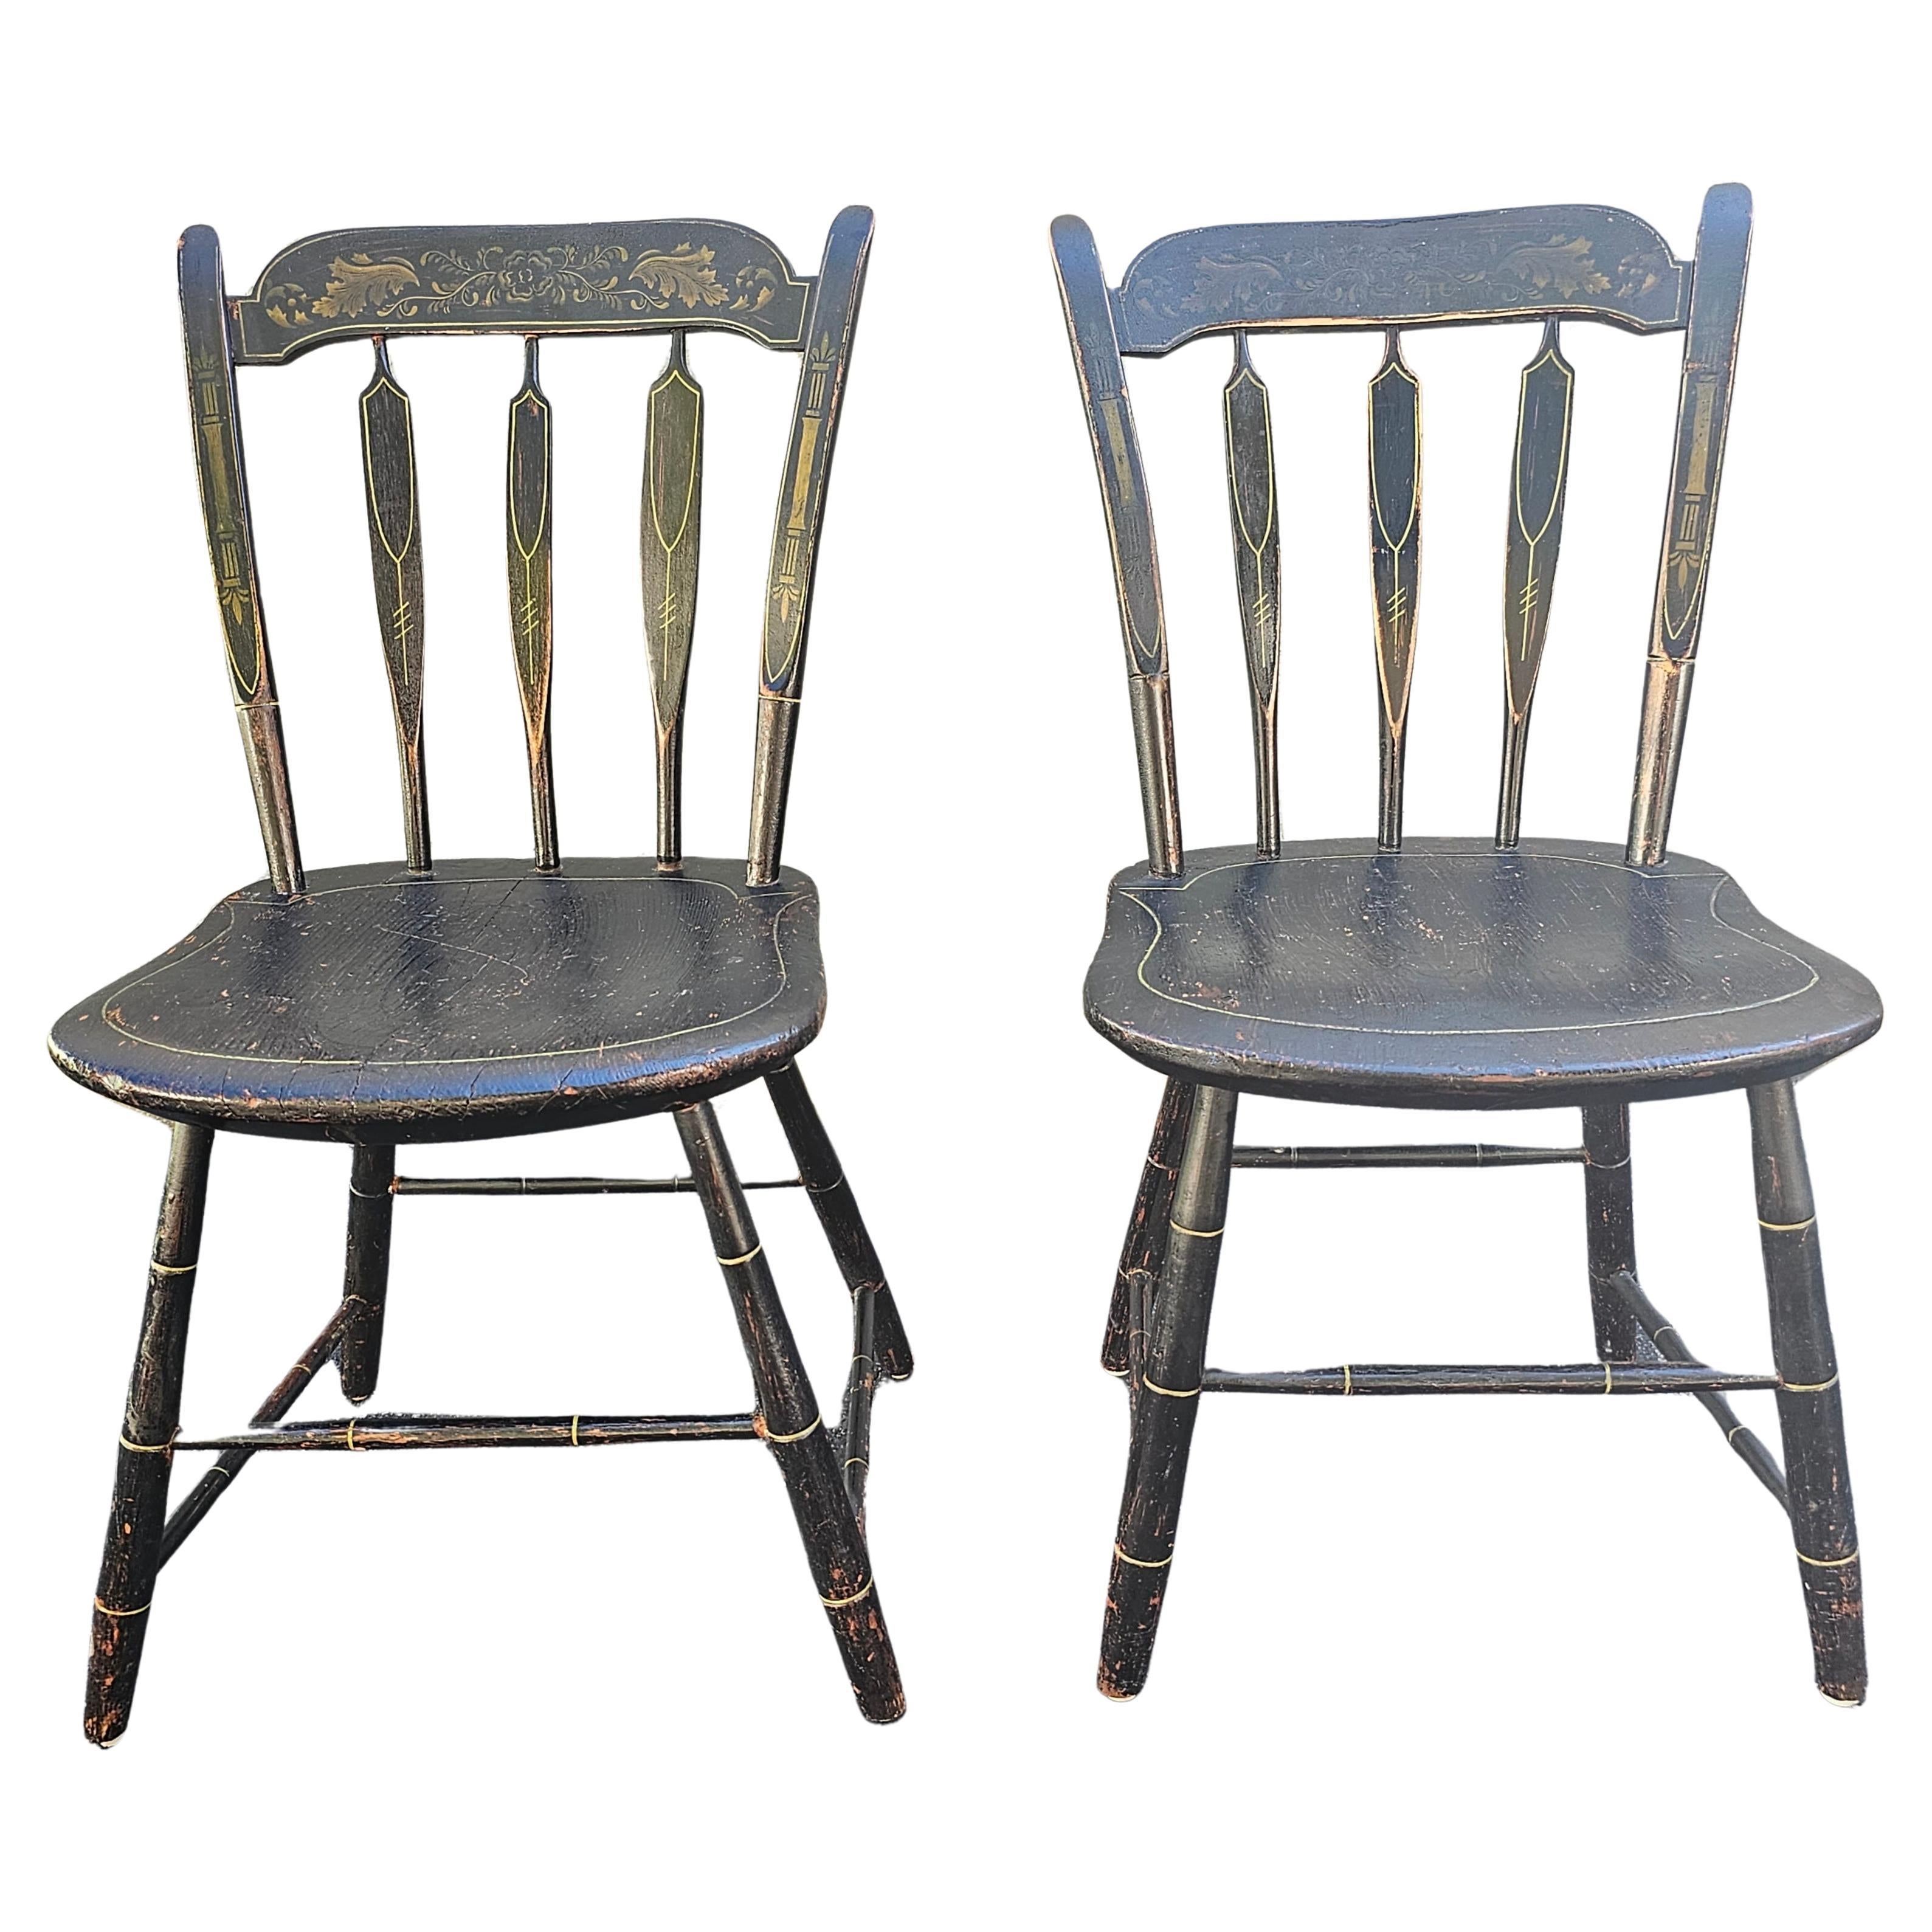 Pair of 19th C. Early American Ebonized and Decorated Side Chairs